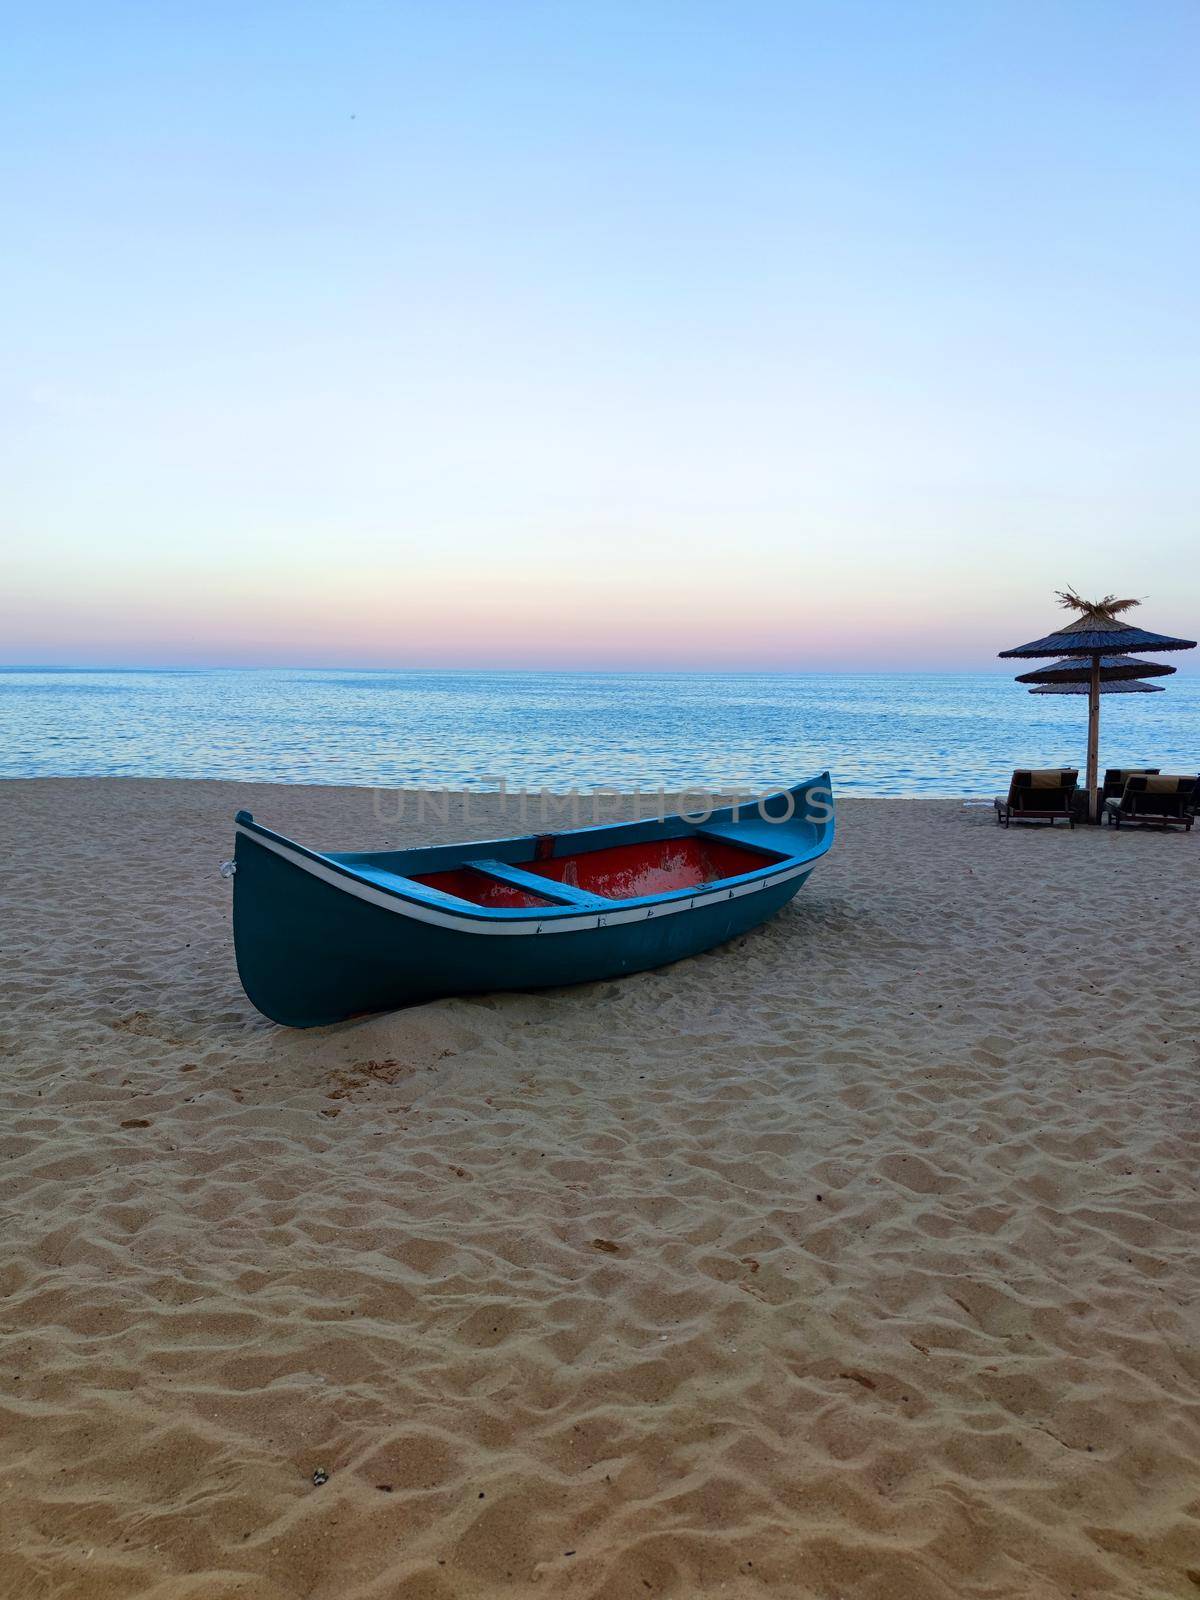 empty old wooden boat on the sand against the background of the sea horizon and sunset sky.